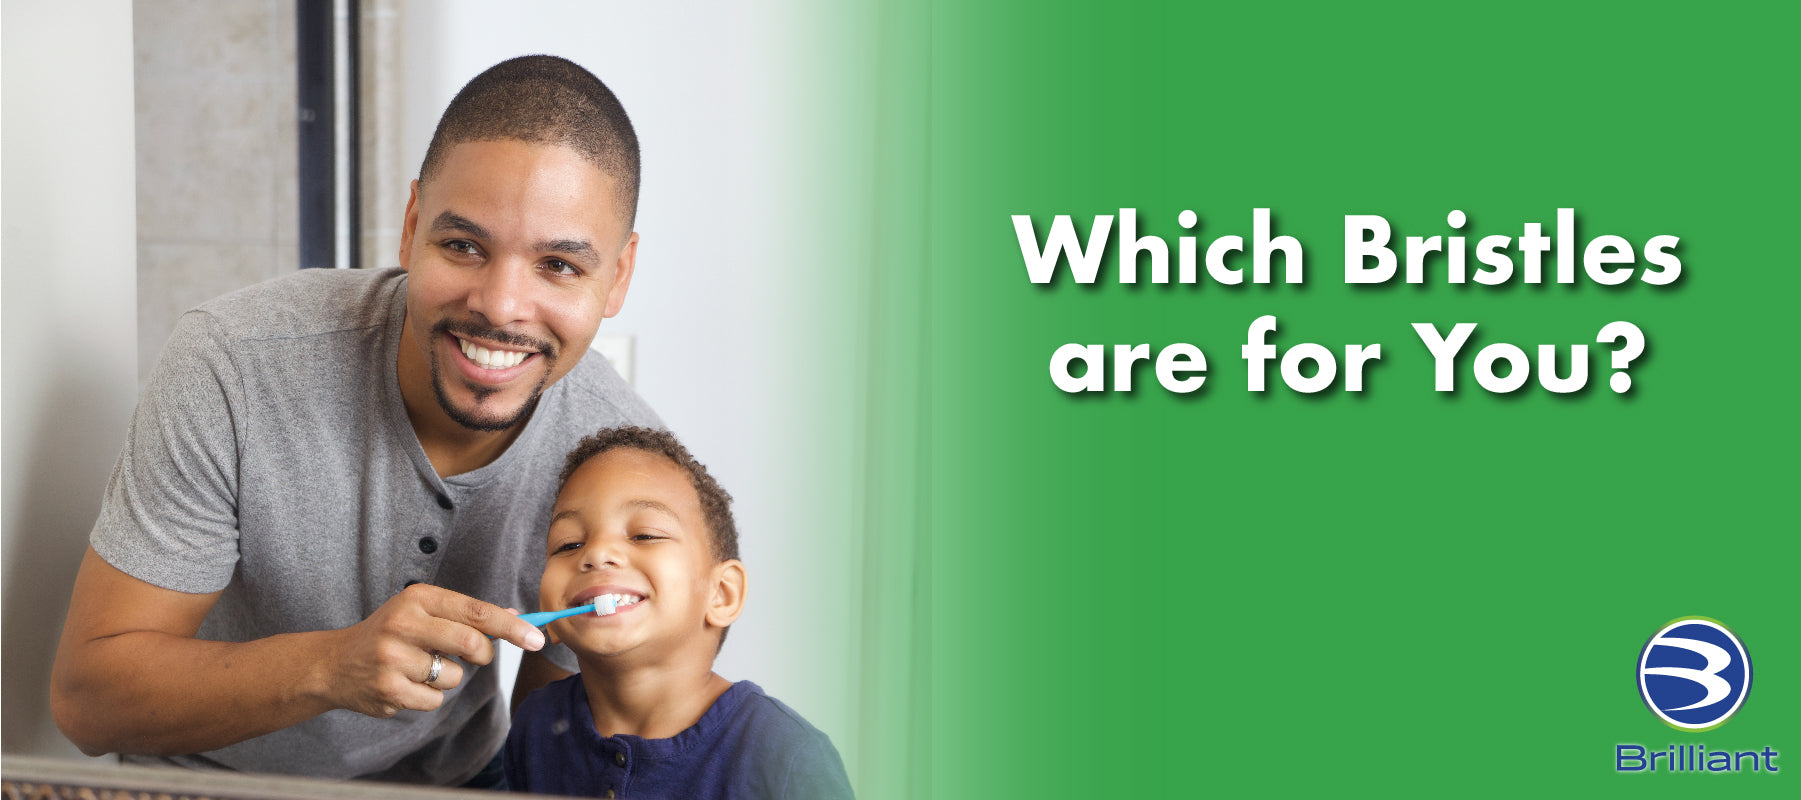 Which Toothbrush is Best: Extra Soft vs Soft and Medium vs Hard